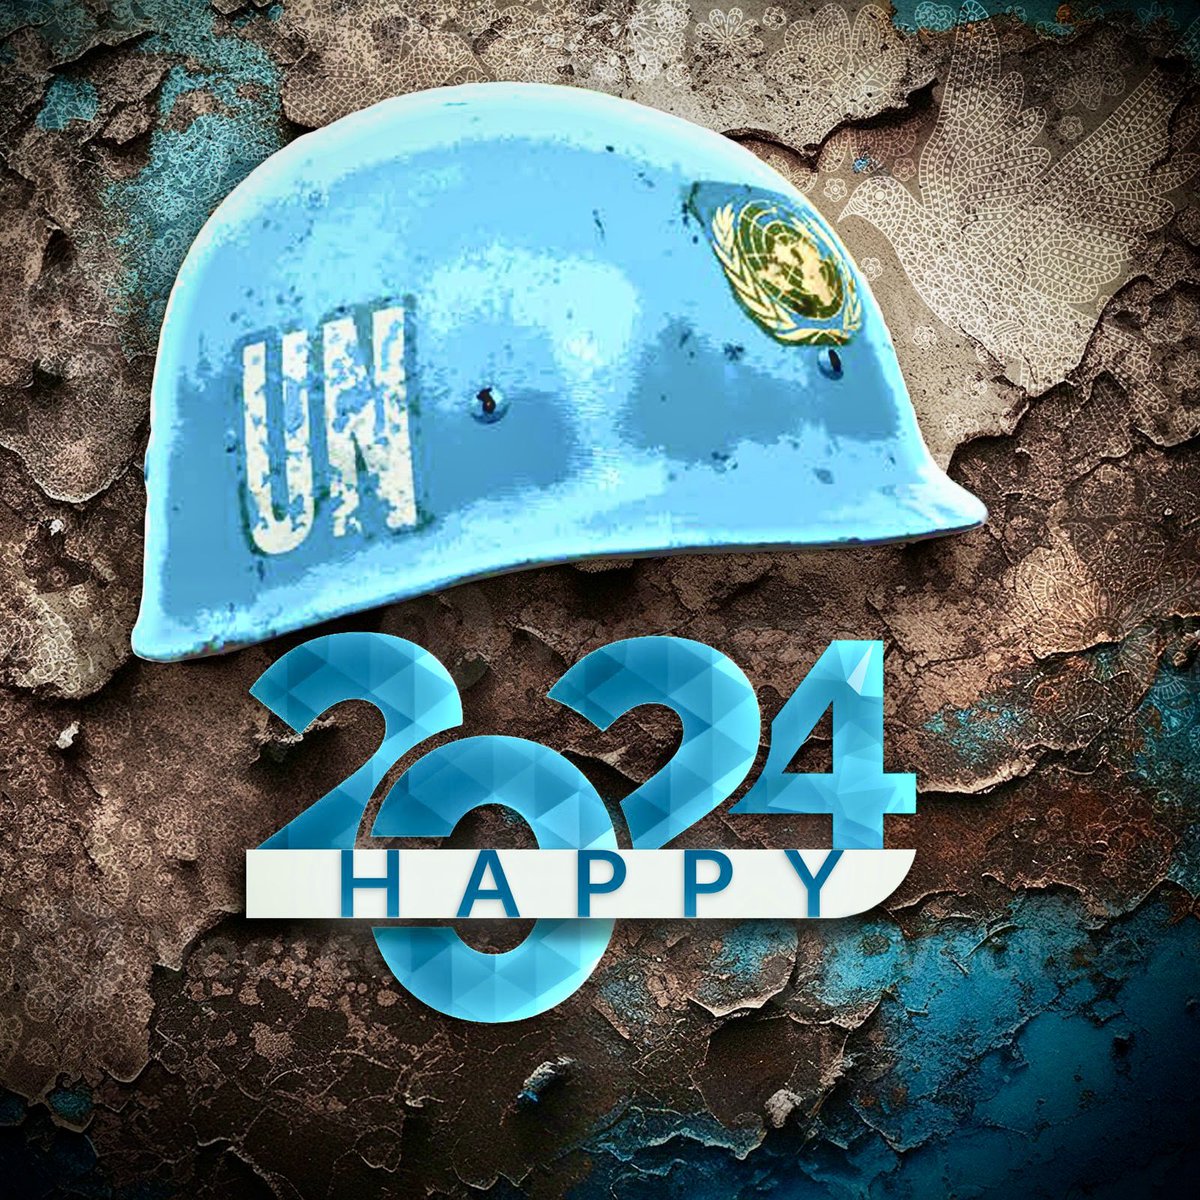 As the new year begins, I hope for a diplomatic solution to ease tensions in this region. Recommitting to Resolution 1701 is crucial. To our dedicated peacekeepers, especially during these tough times, thank you. Your safety is our priority. Wishing you all a #HappyNewYear!